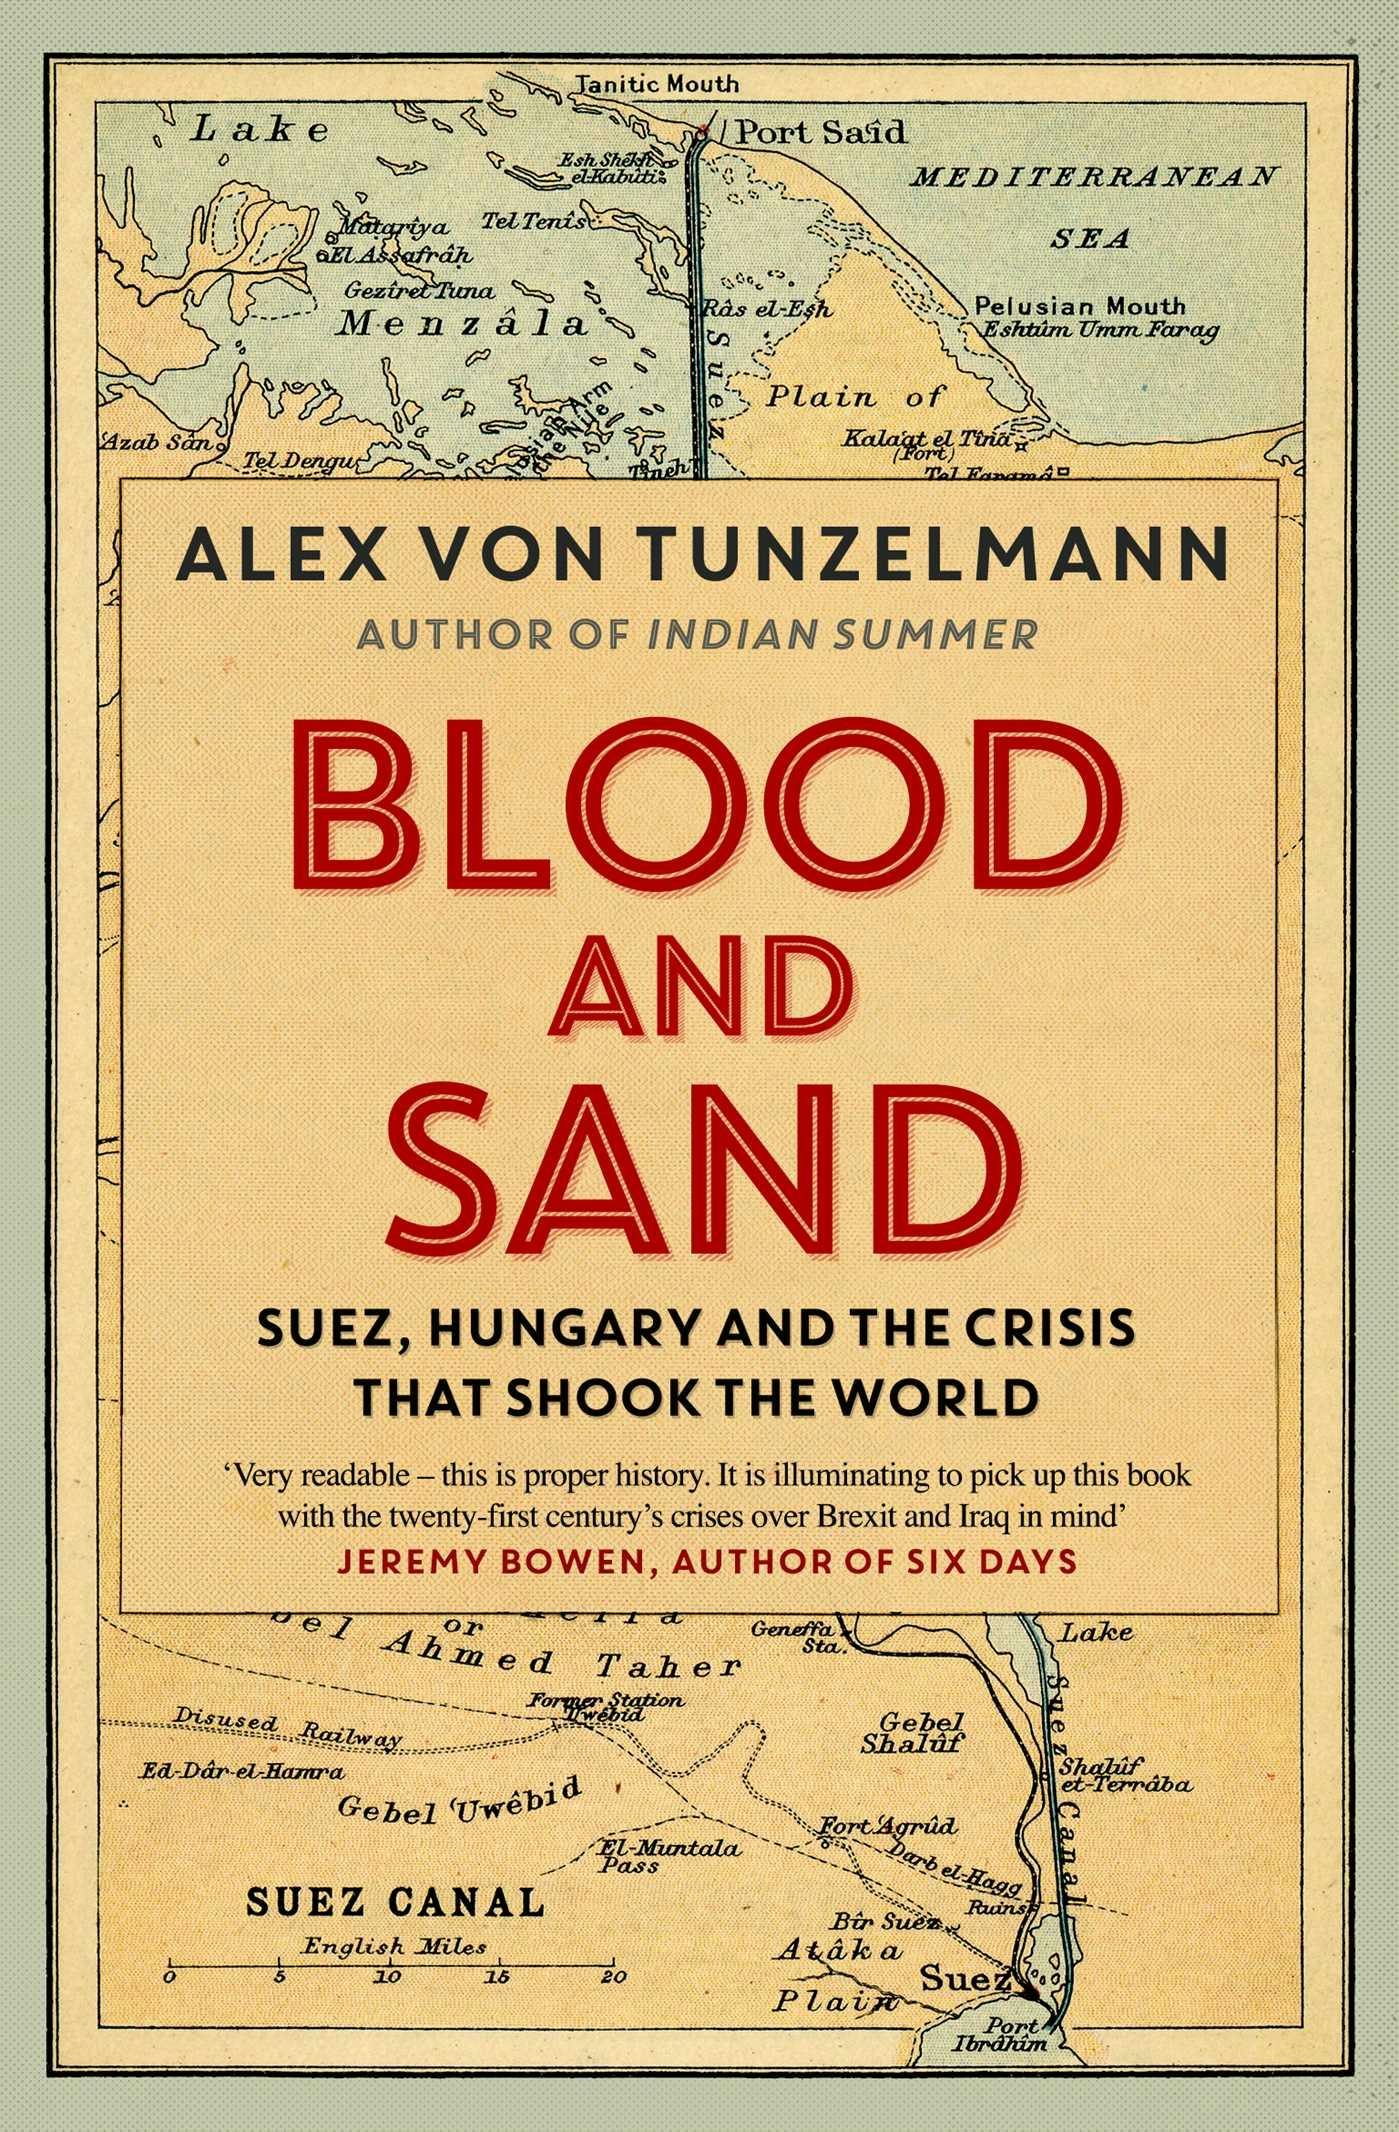 Blood and Sand: Suez, Hungary and the Crisis That Shook the World - Alex von Tunzelmann